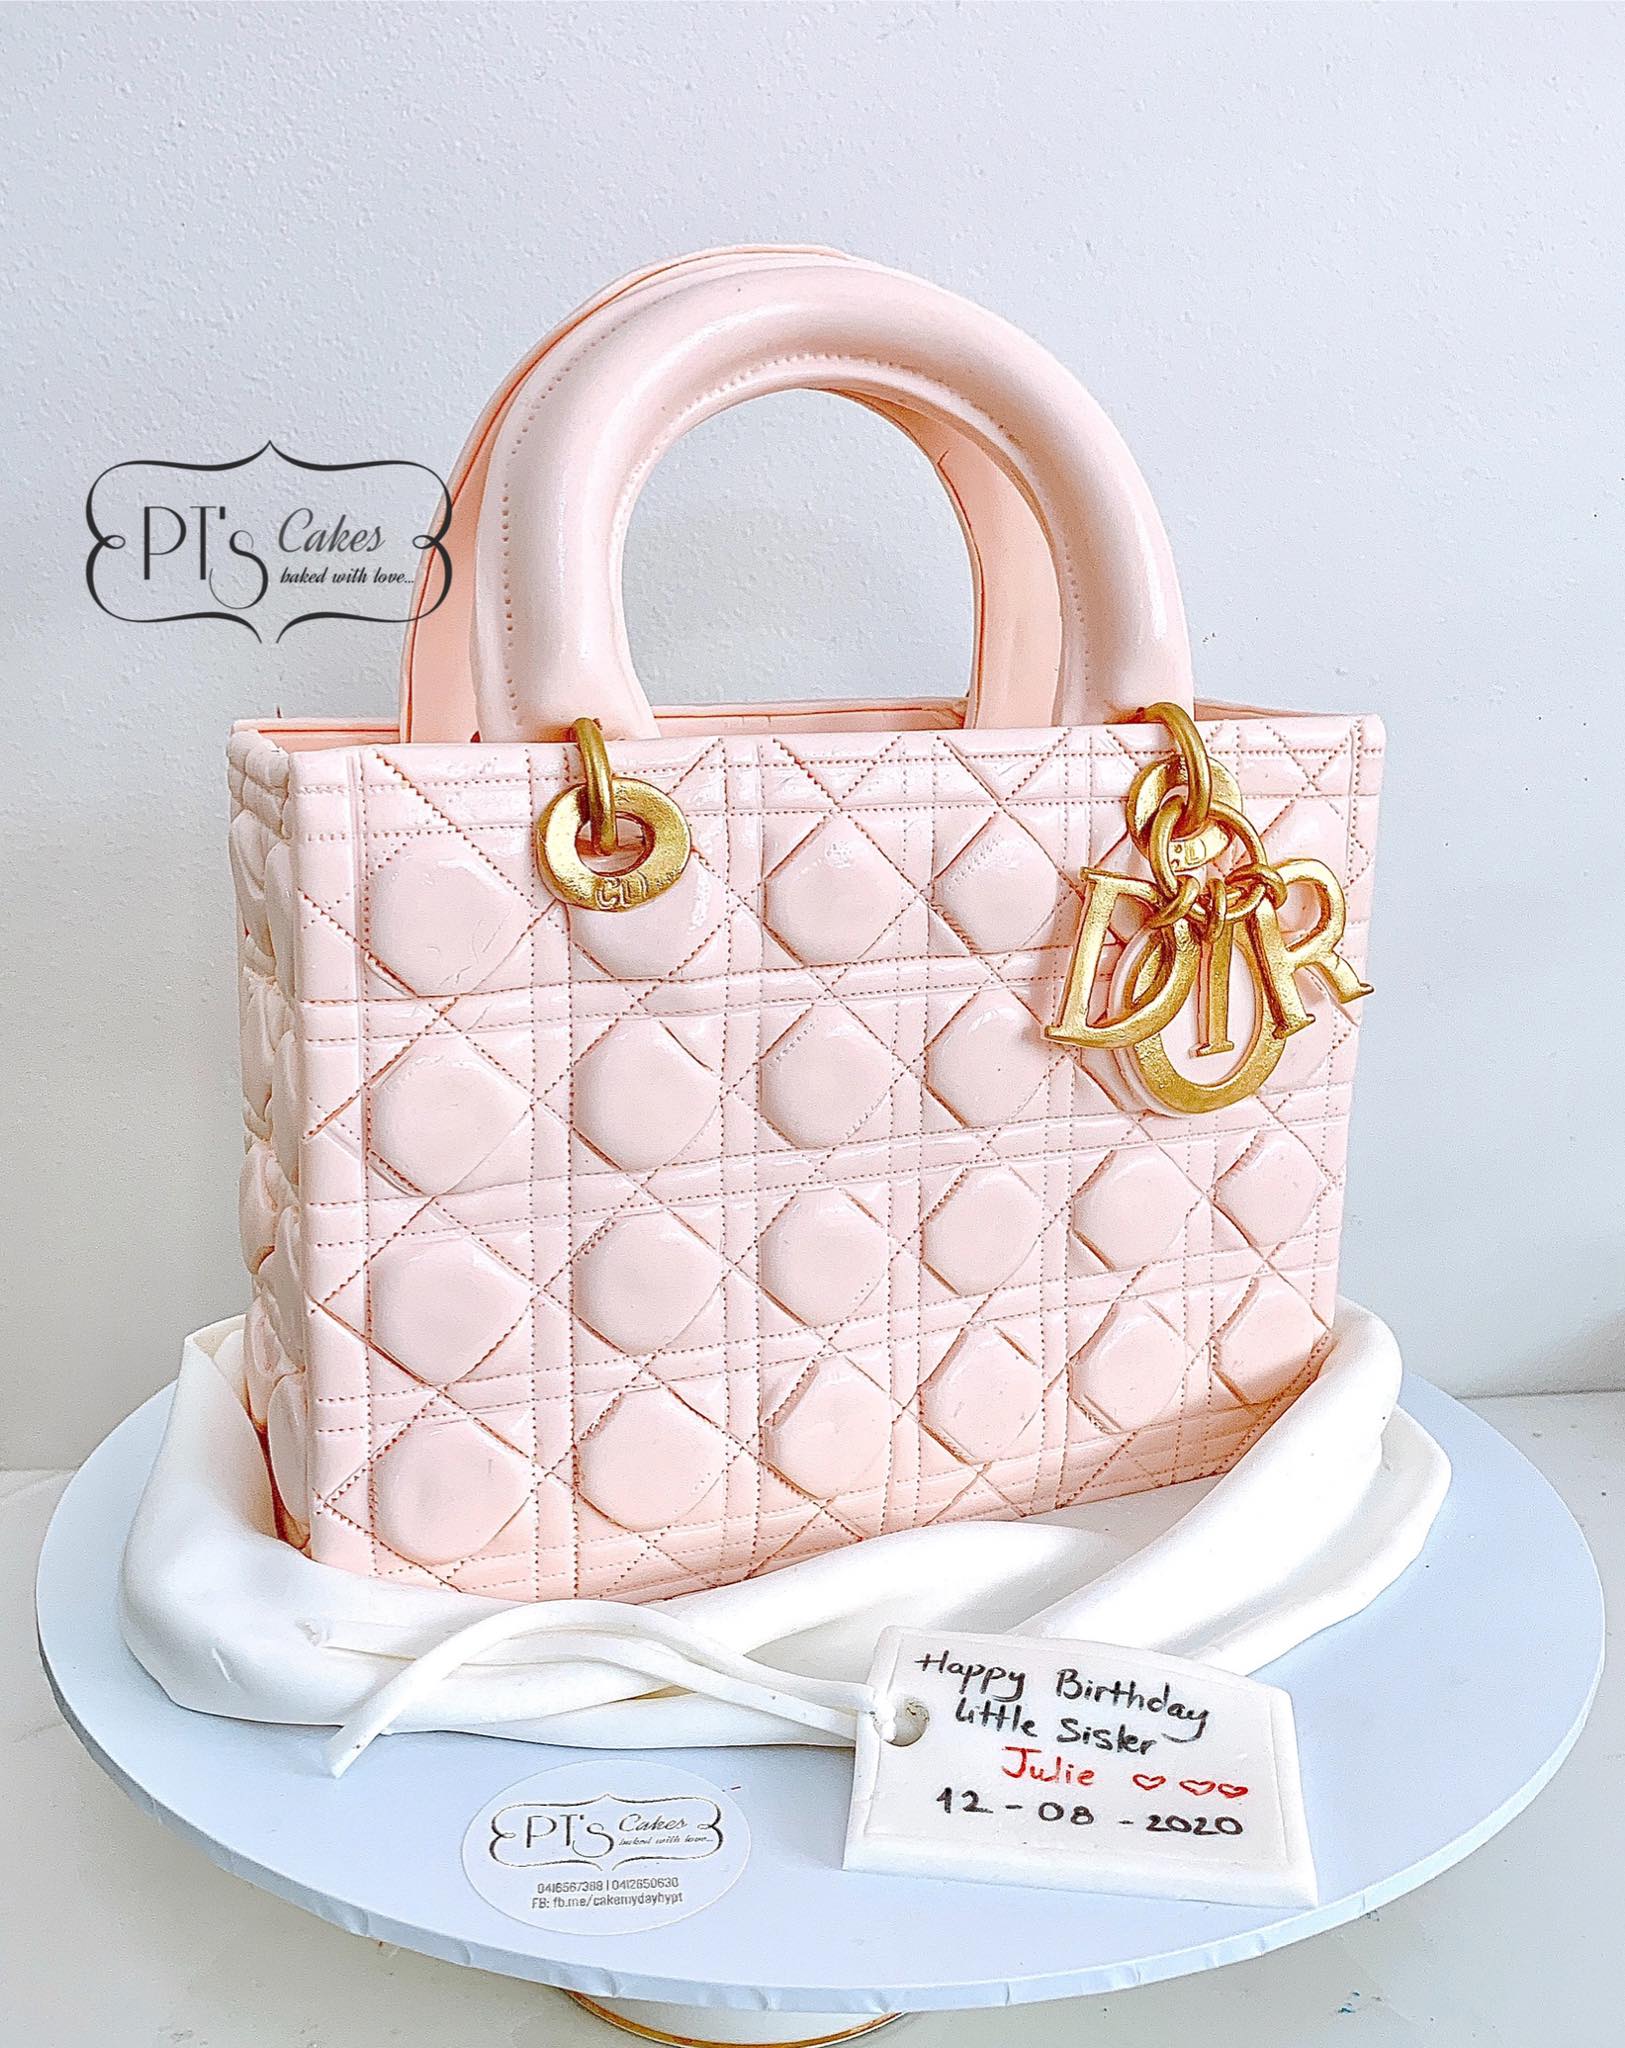 Pink Mulberry Handbag Cake with Jimmy Choo Shoe | Susie's Cakes